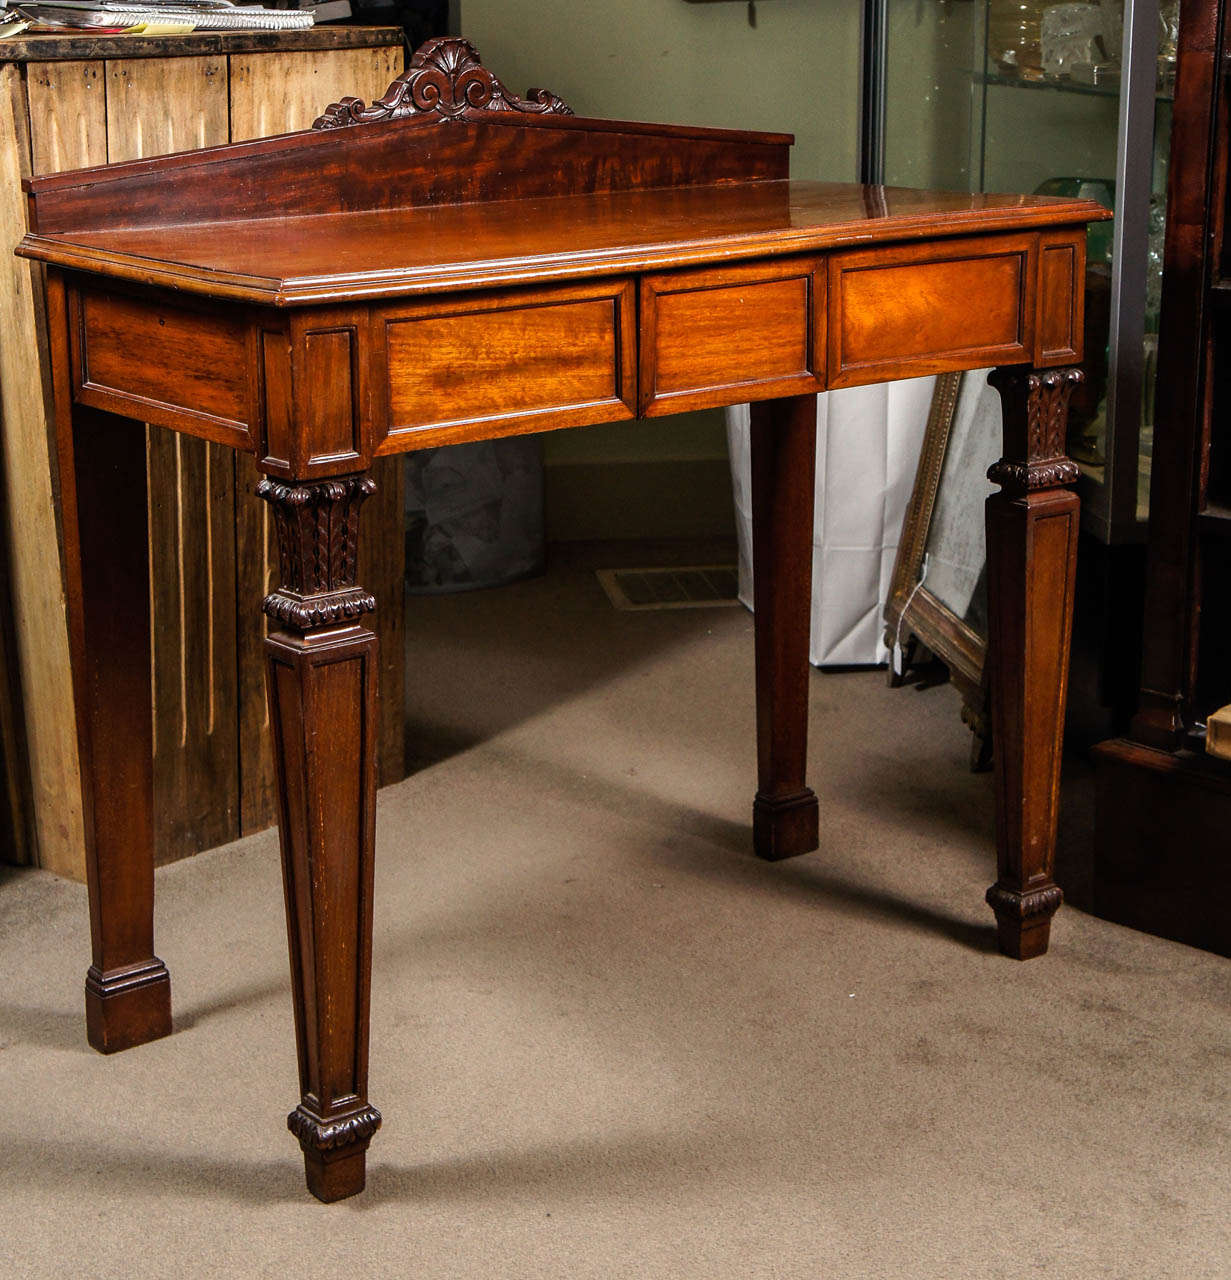 William IV mahogany console with three hidden drawers and fine carvings.